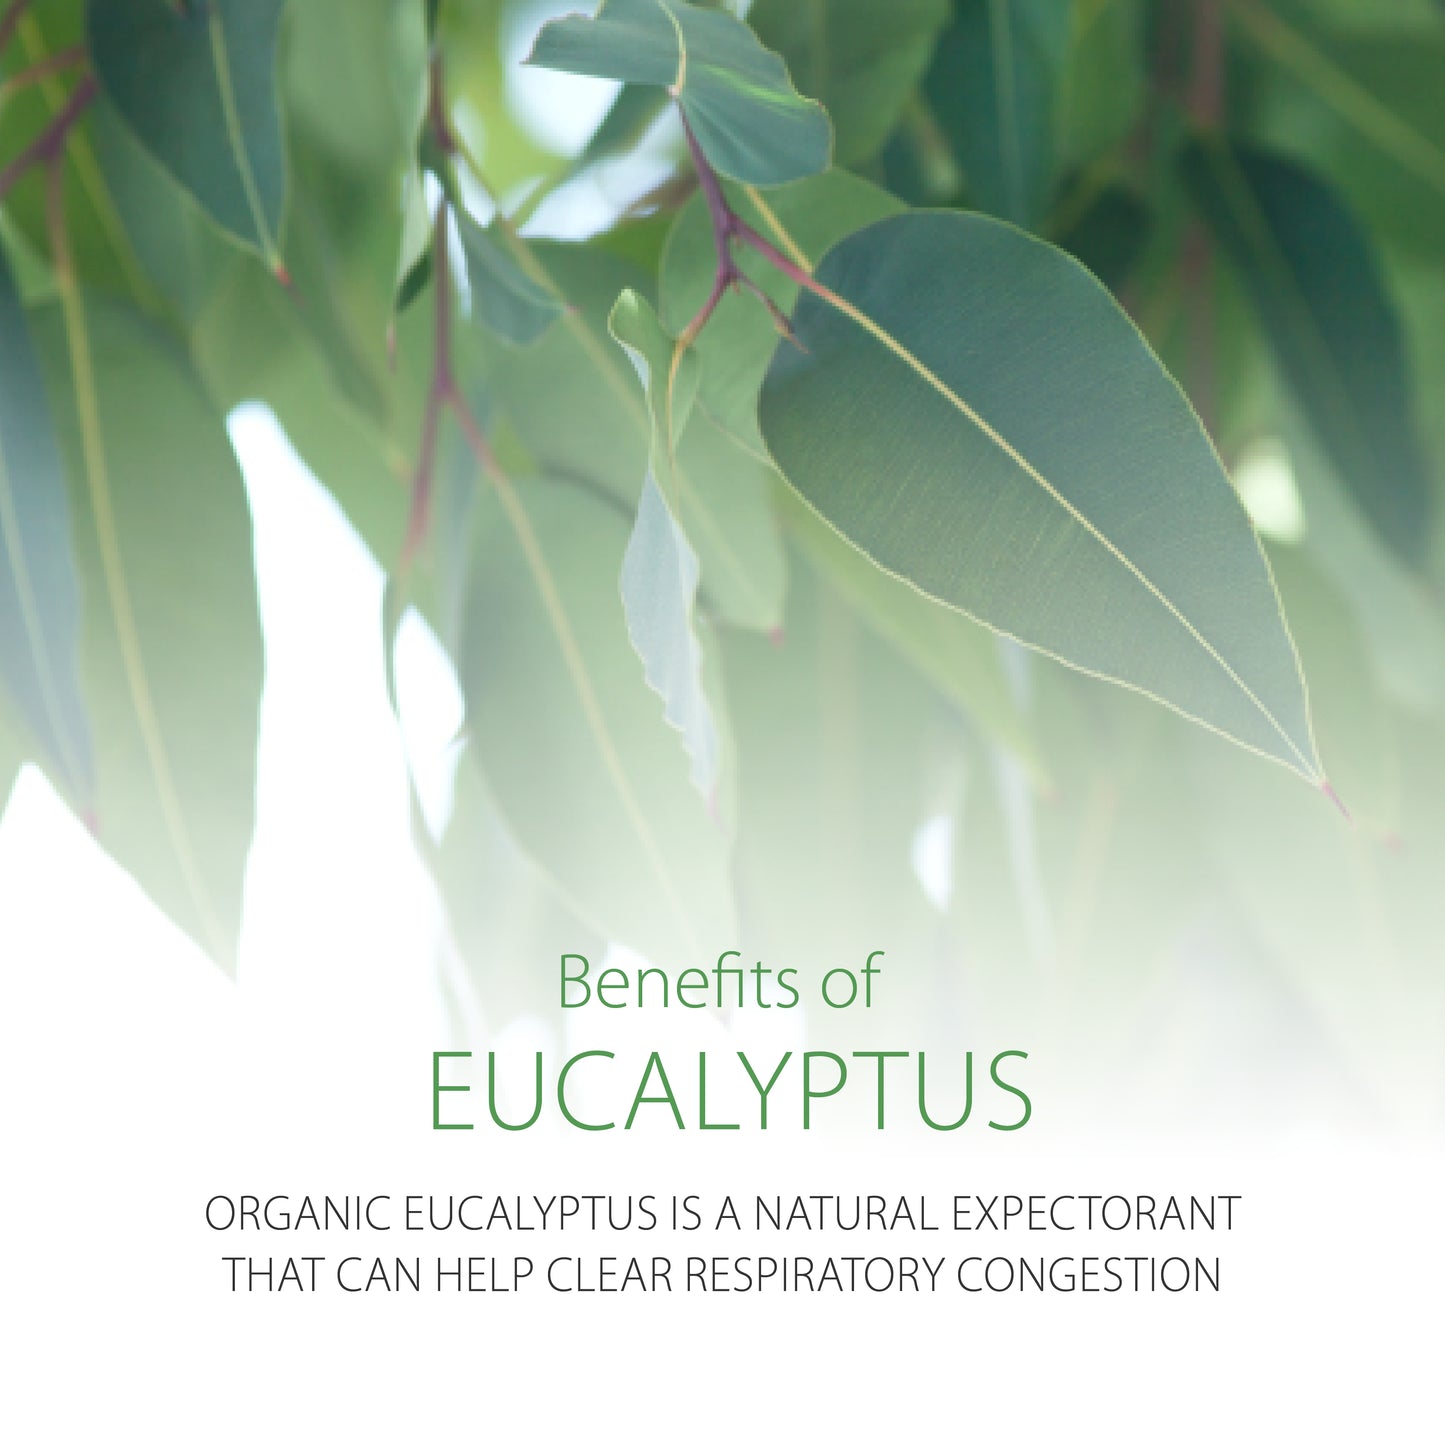 Pittapatta Chest Stick is made with organic eucalyptus a natural expectorant that can help clear respiratory congestion